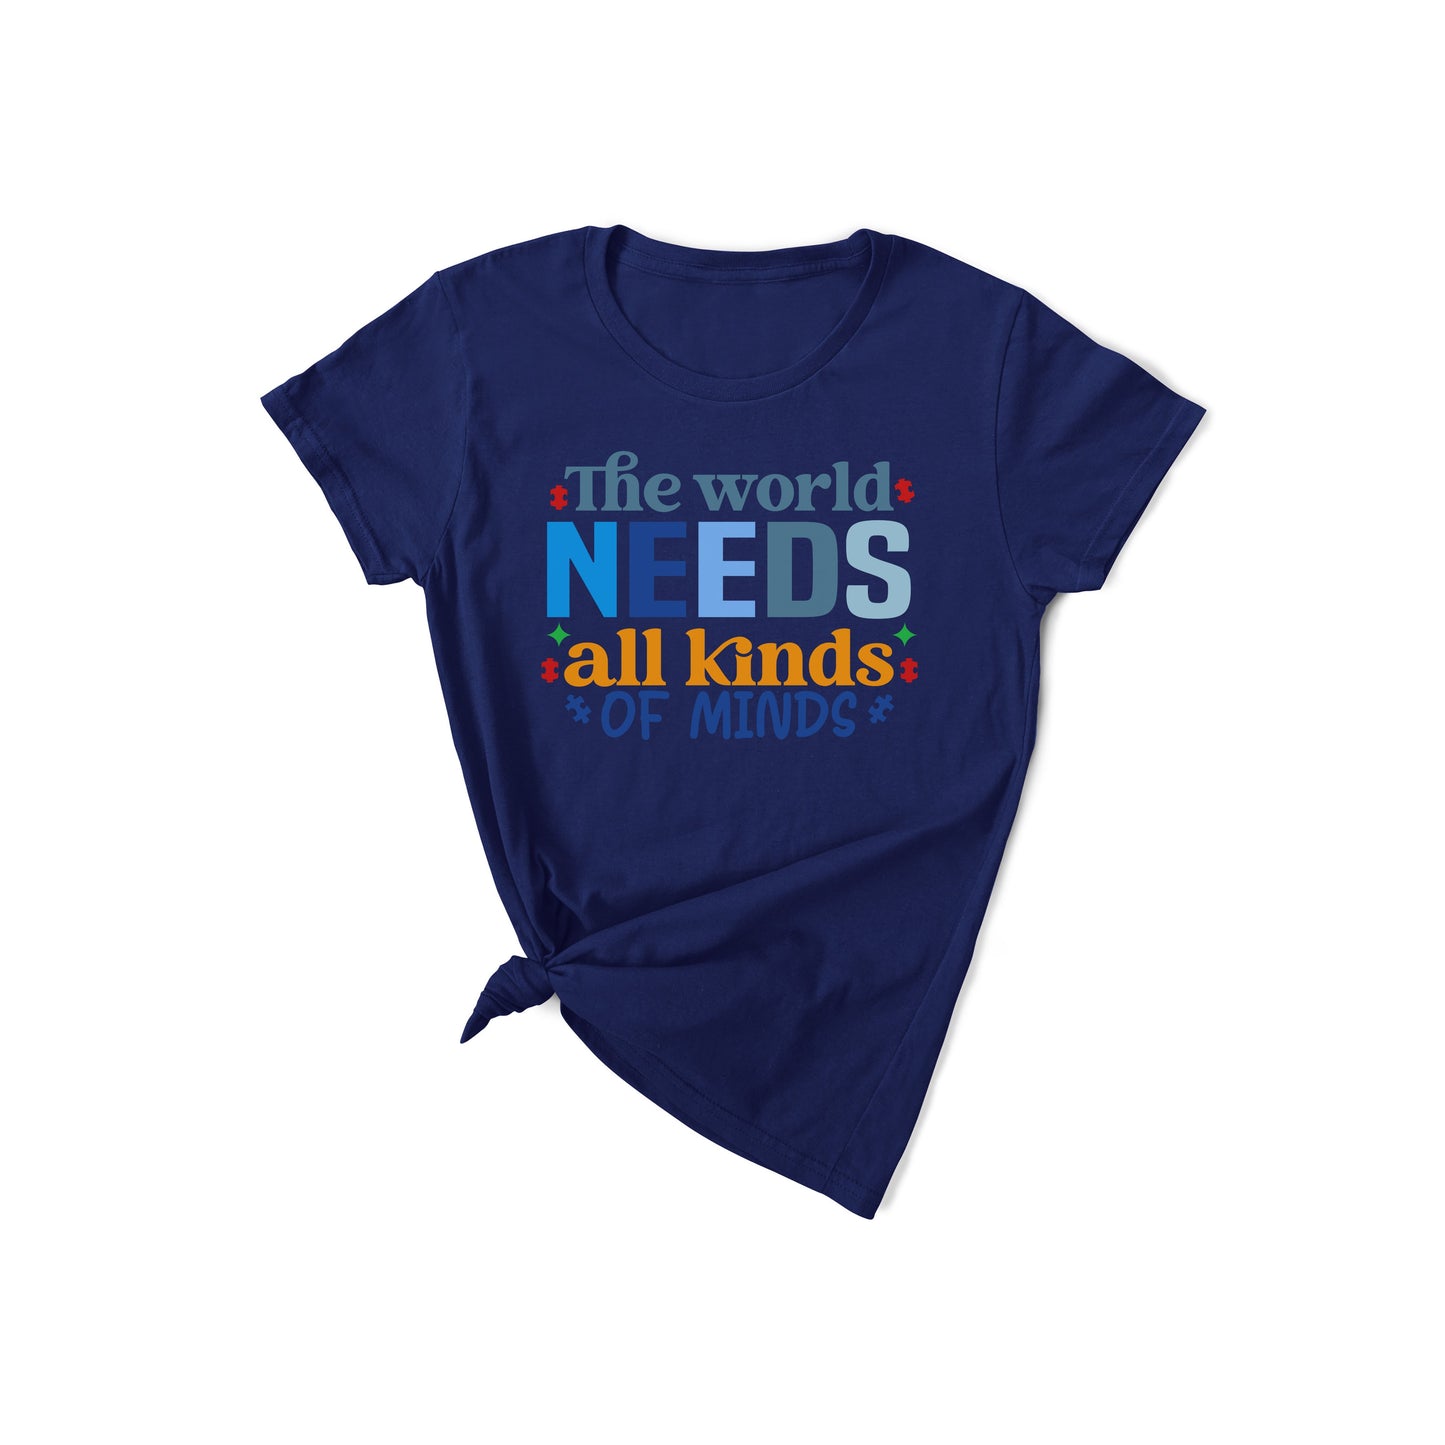 The World Needs All Kinds of Minds - Autism T-Shirt